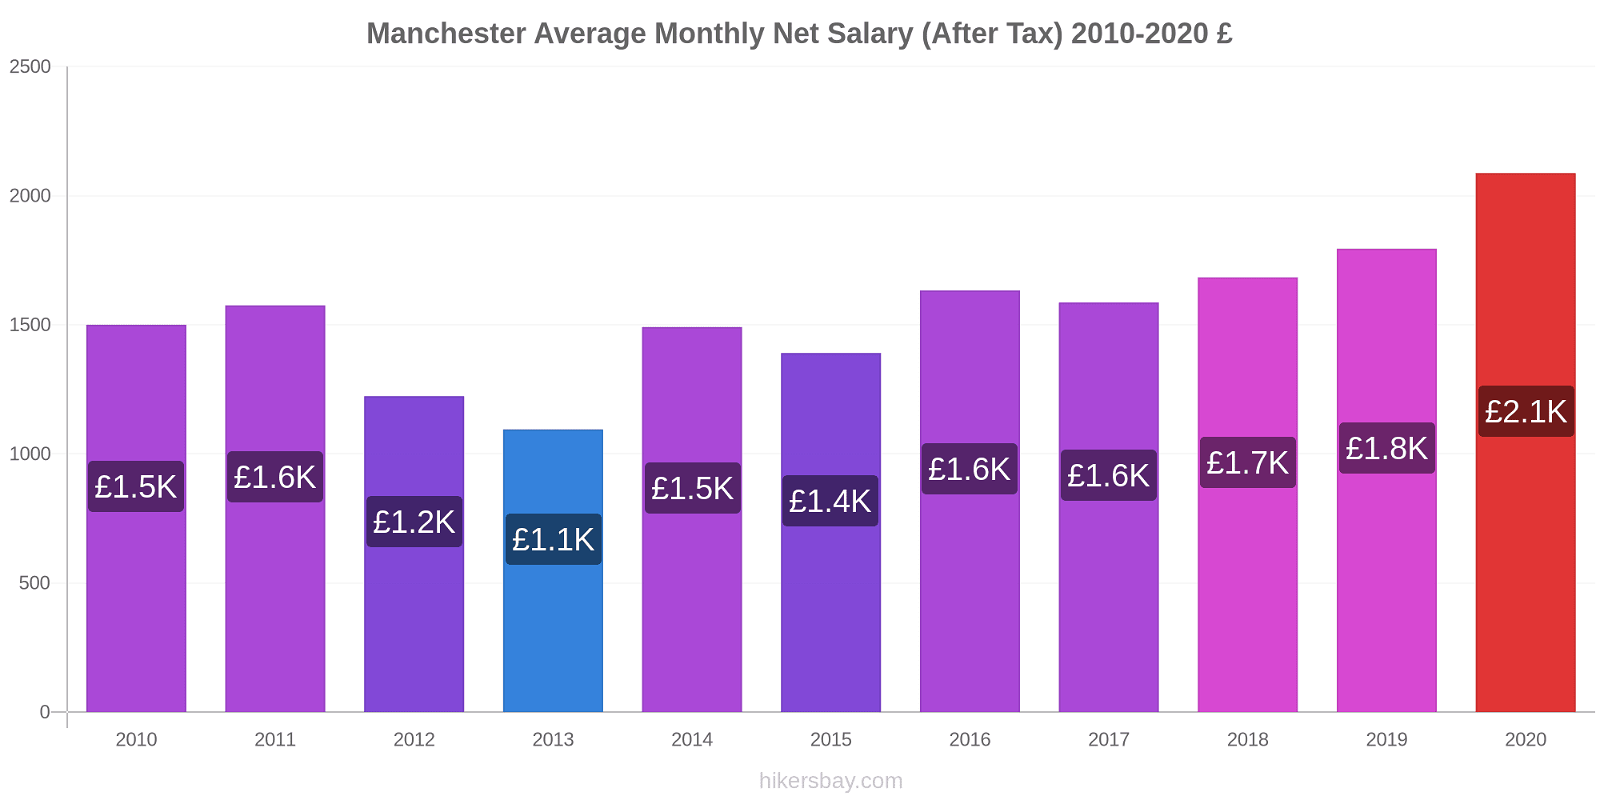 Manchester price changes Average Monthly Net Salary (After Tax) hikersbay.com